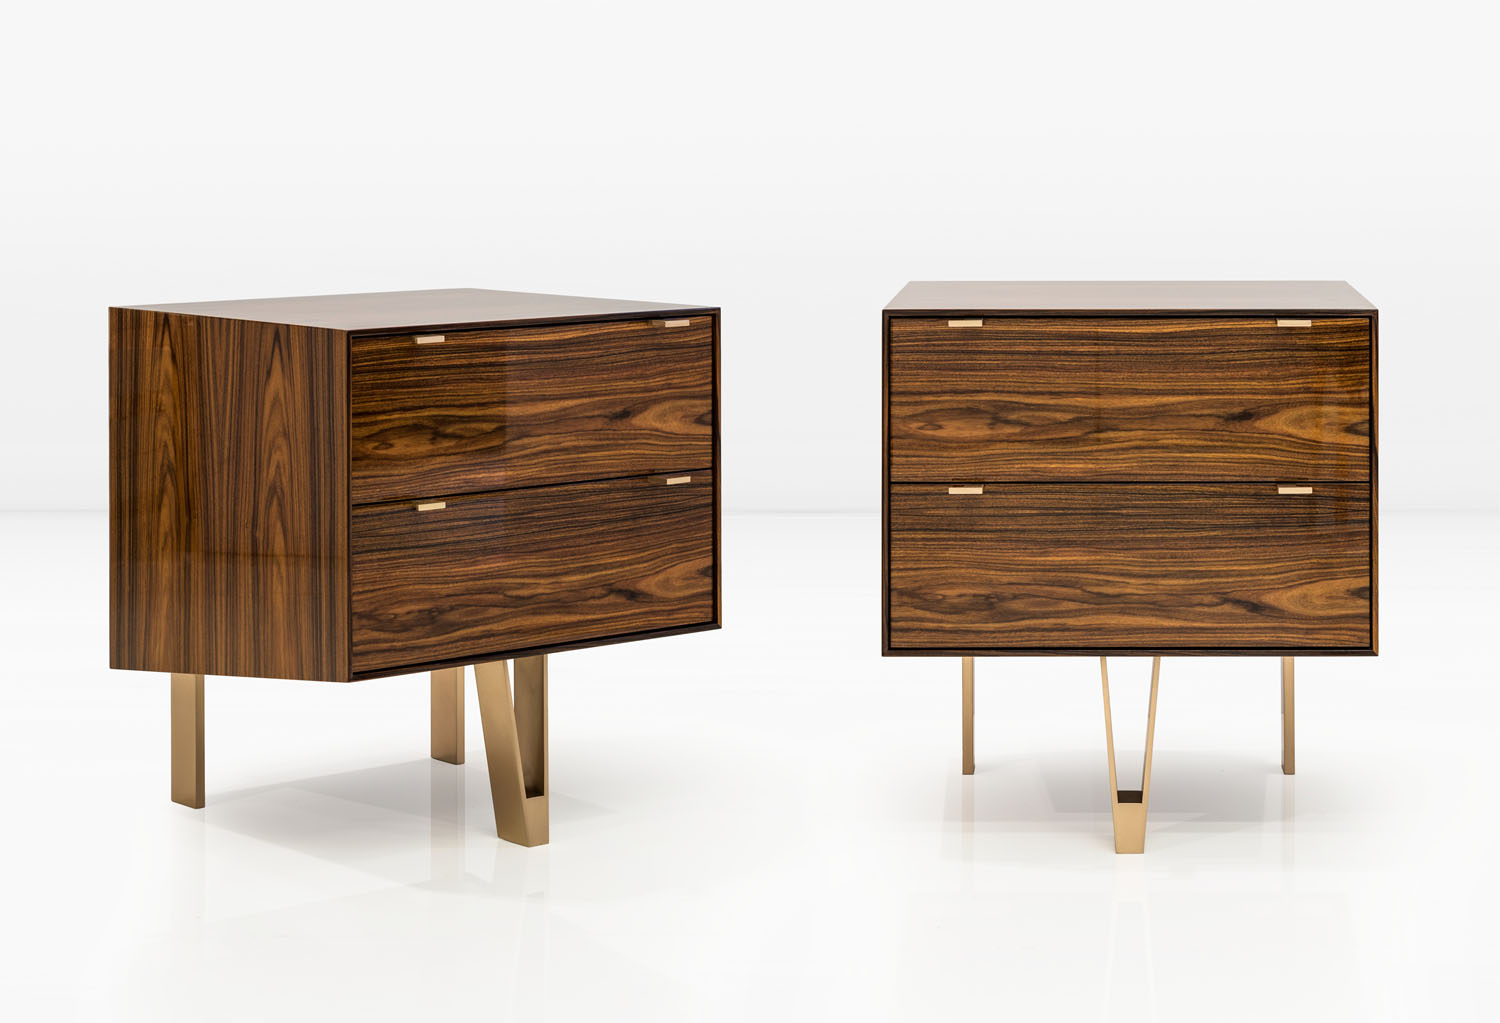  Lacquered South American Rosewood with Silicon Bronze legs and hardware 